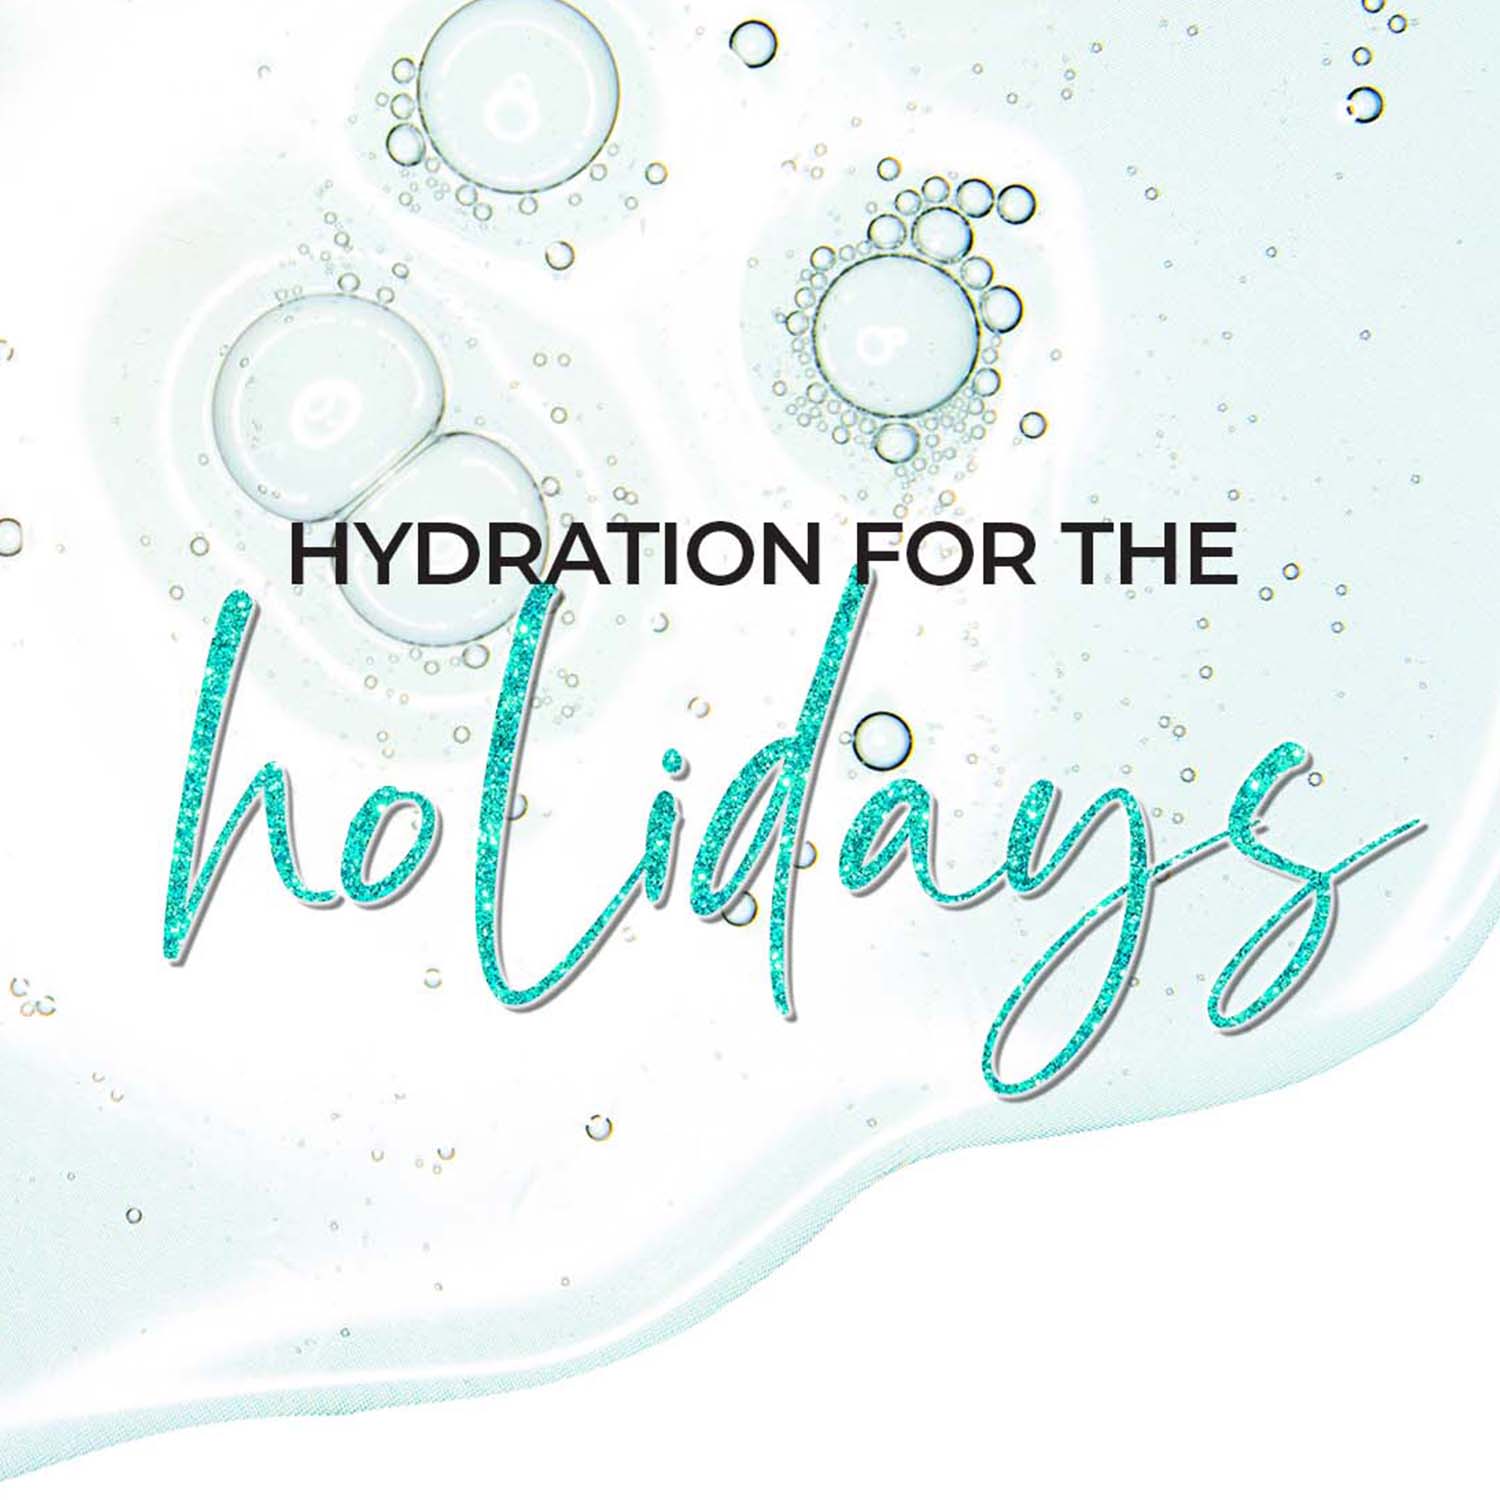 Hydration for the Holidays